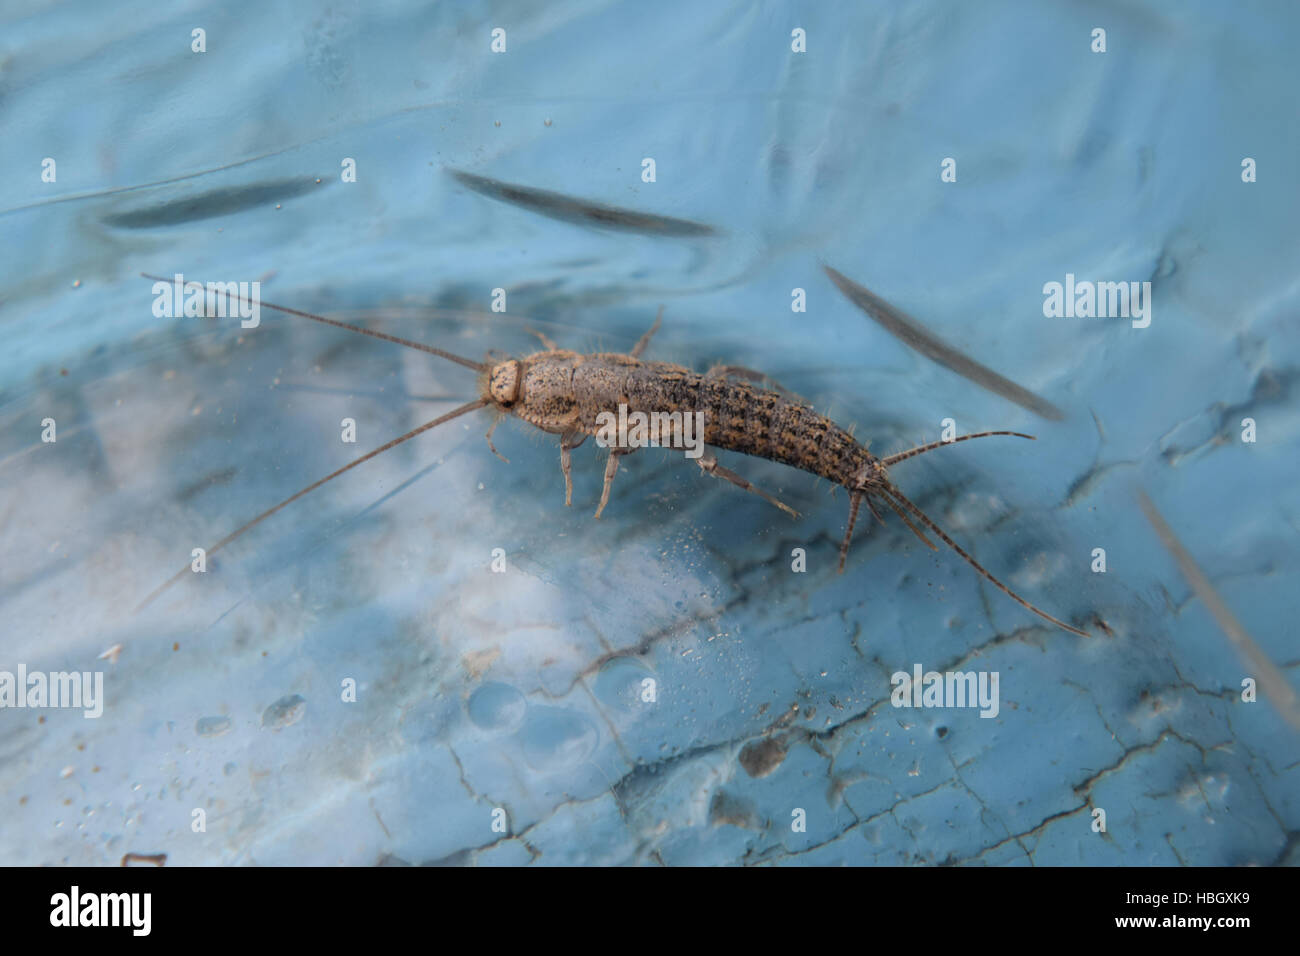 Insect feeding on paper - silverfish Stock Photo